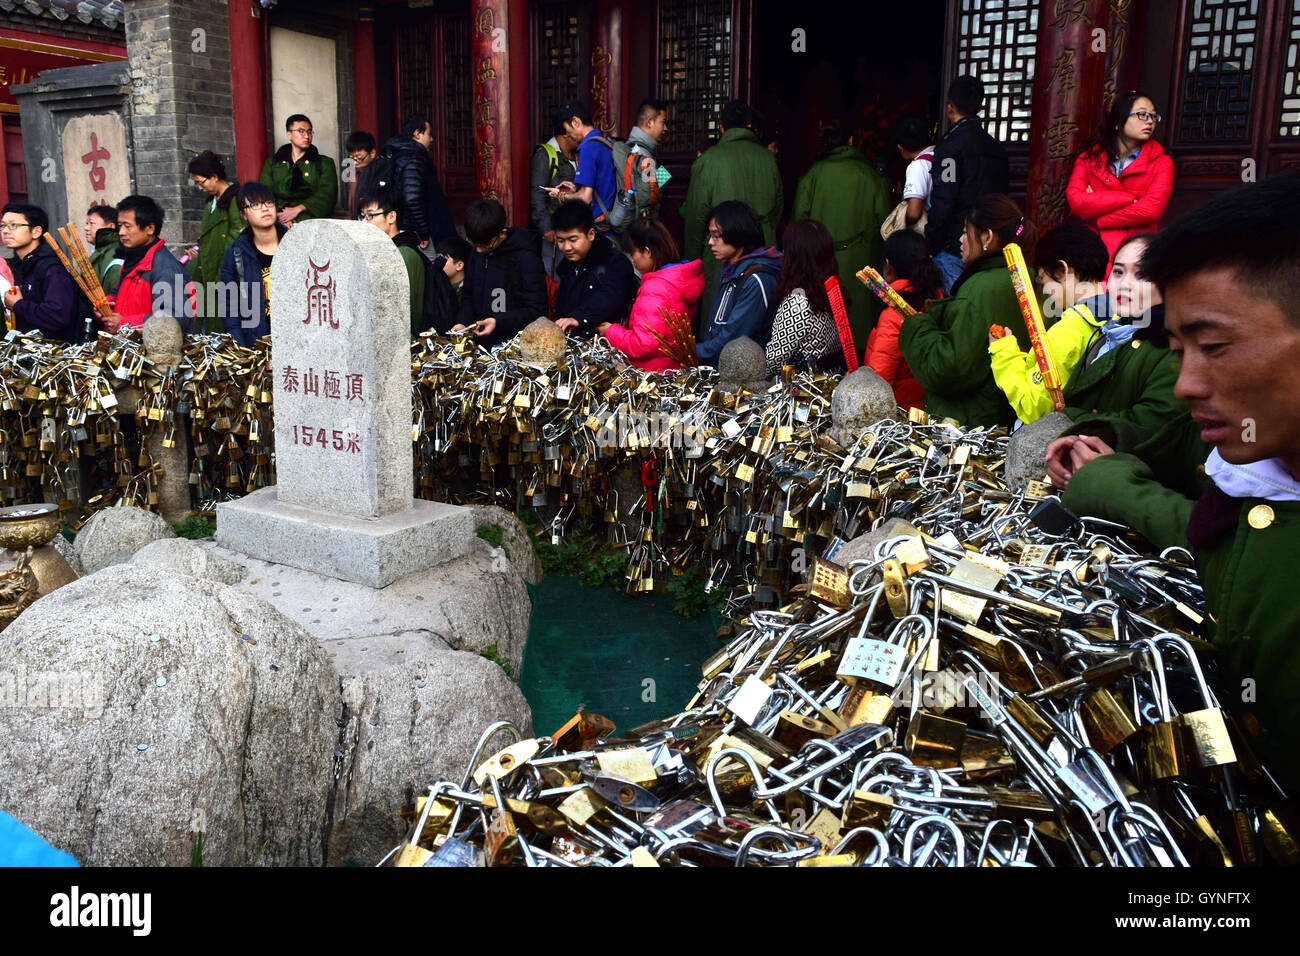 September 19, 2016 - Tai'An, Tai'an, China - TaiÂ¡Â¯an, CHINA-September 17 2016:?(EDITORIAL?USE?ONLY.?CHINA?OUT) Tourists at the Mount Tai in TaiÂ¡Â¯an, east ChinaÂ¡Â¯s Shandong Province, on September 17, 2016. The tourist flow of Mount Tai rose to 39,420 from September 15 to September 16 during the Mid-Autumn Festival. Many tourists climbed the Mount Tai on night, which made it possible for them to enjoy the full moon during night and see the sunrise on the dawn. © SIPA Asia/ZUMA Wire/Alamy Live News Stock Photo